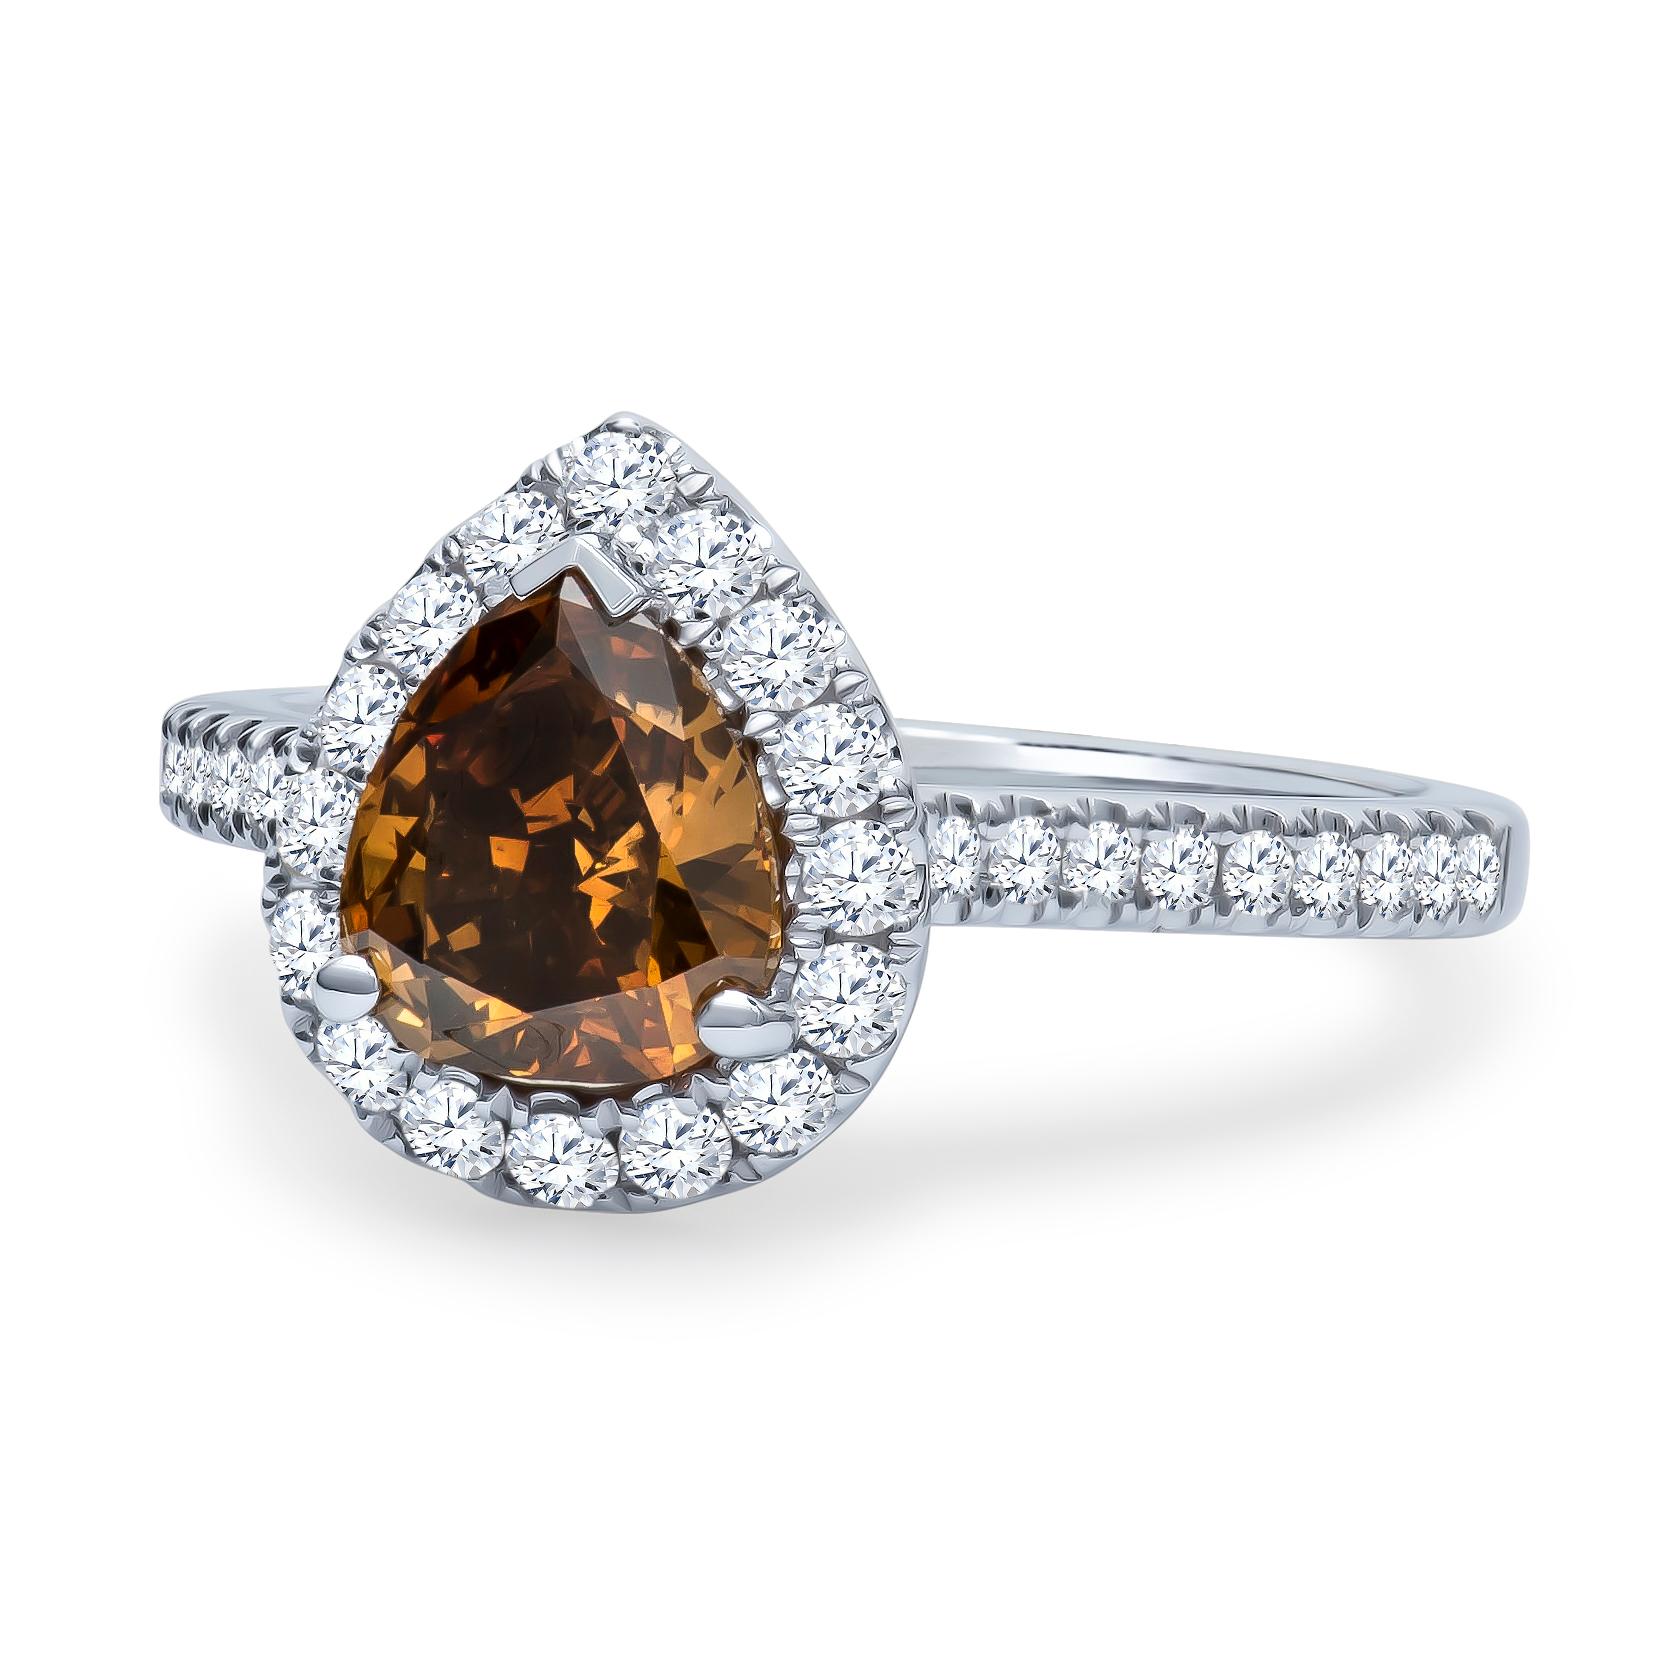 1.21 Carat pear shape fancy dark yellowish brown center diamond with 0.46 carats total weight of split prong-set round brilliant diamonds. In 18K white gold, size 6.5 and may be resized to larger or smaller upon request. 
Clarity: SI2

